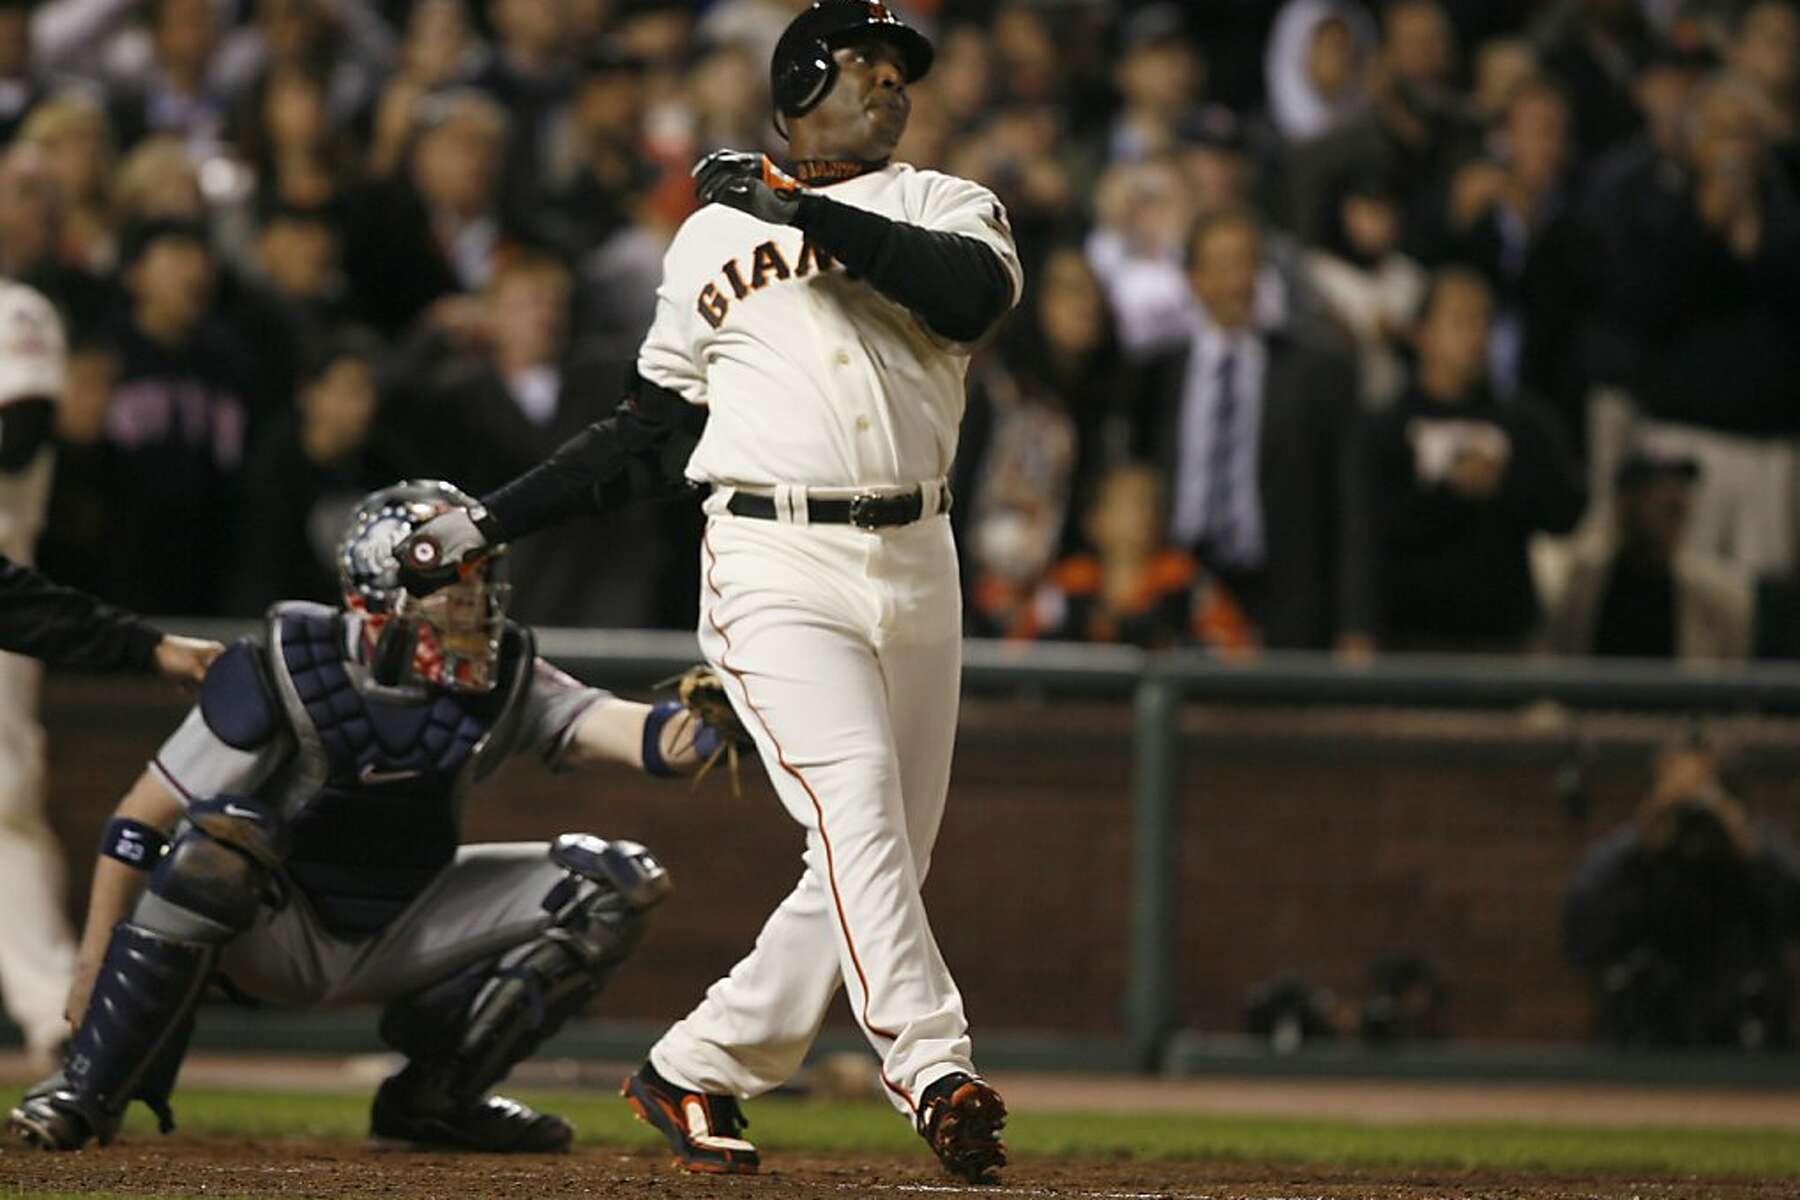 Bonds Hits No. 756 to Break Aaron's Record - The New York Times